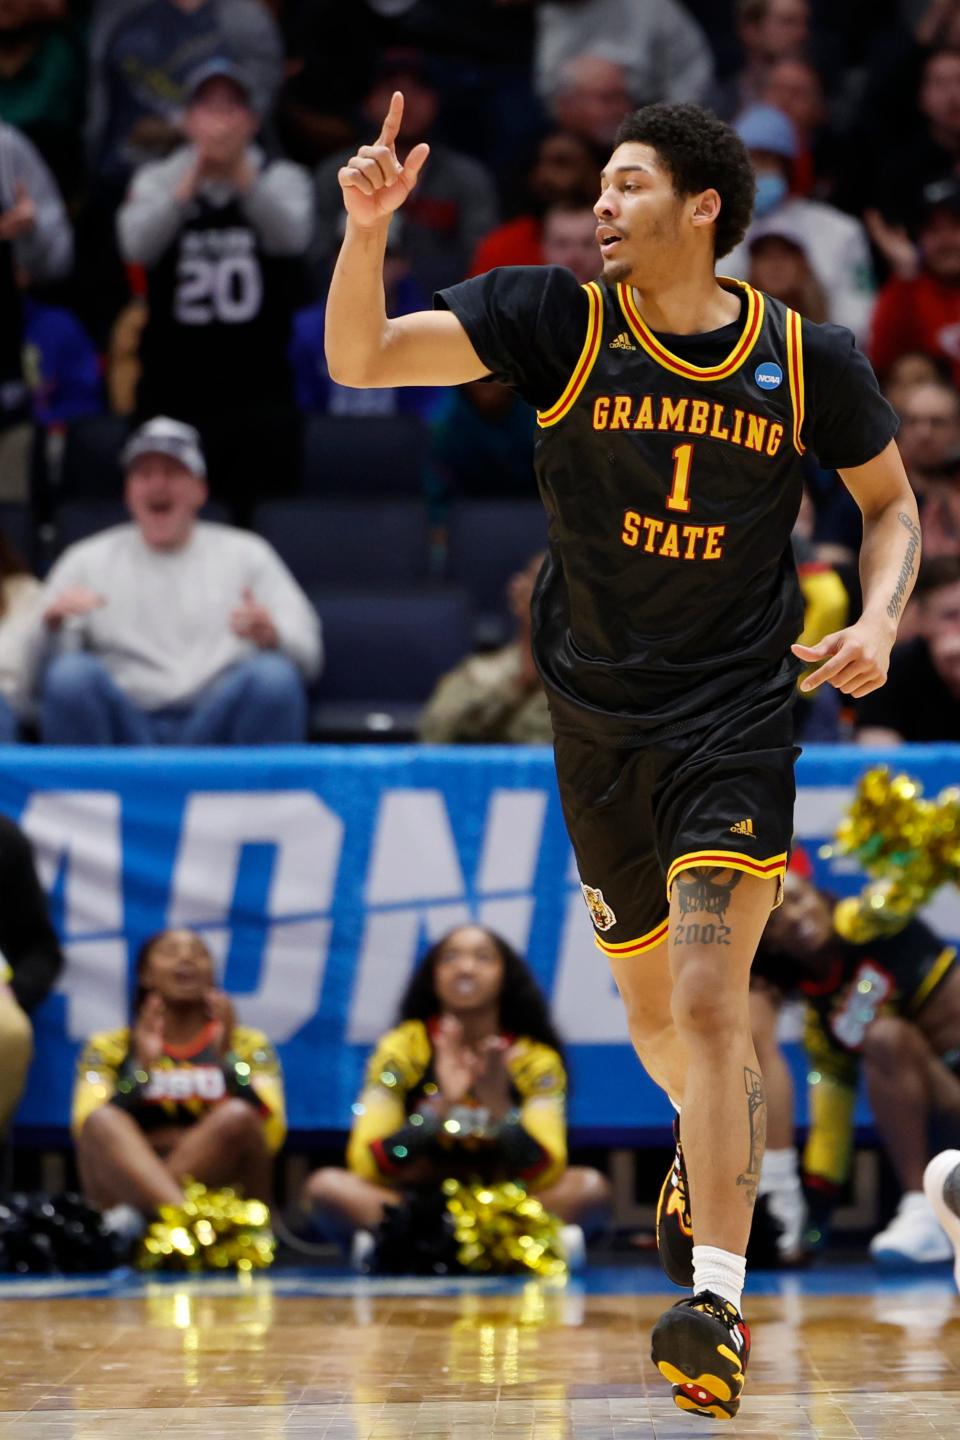 Jimel Cofer reacts after a shot during Grambling State's win over Montana State on Wednesday.